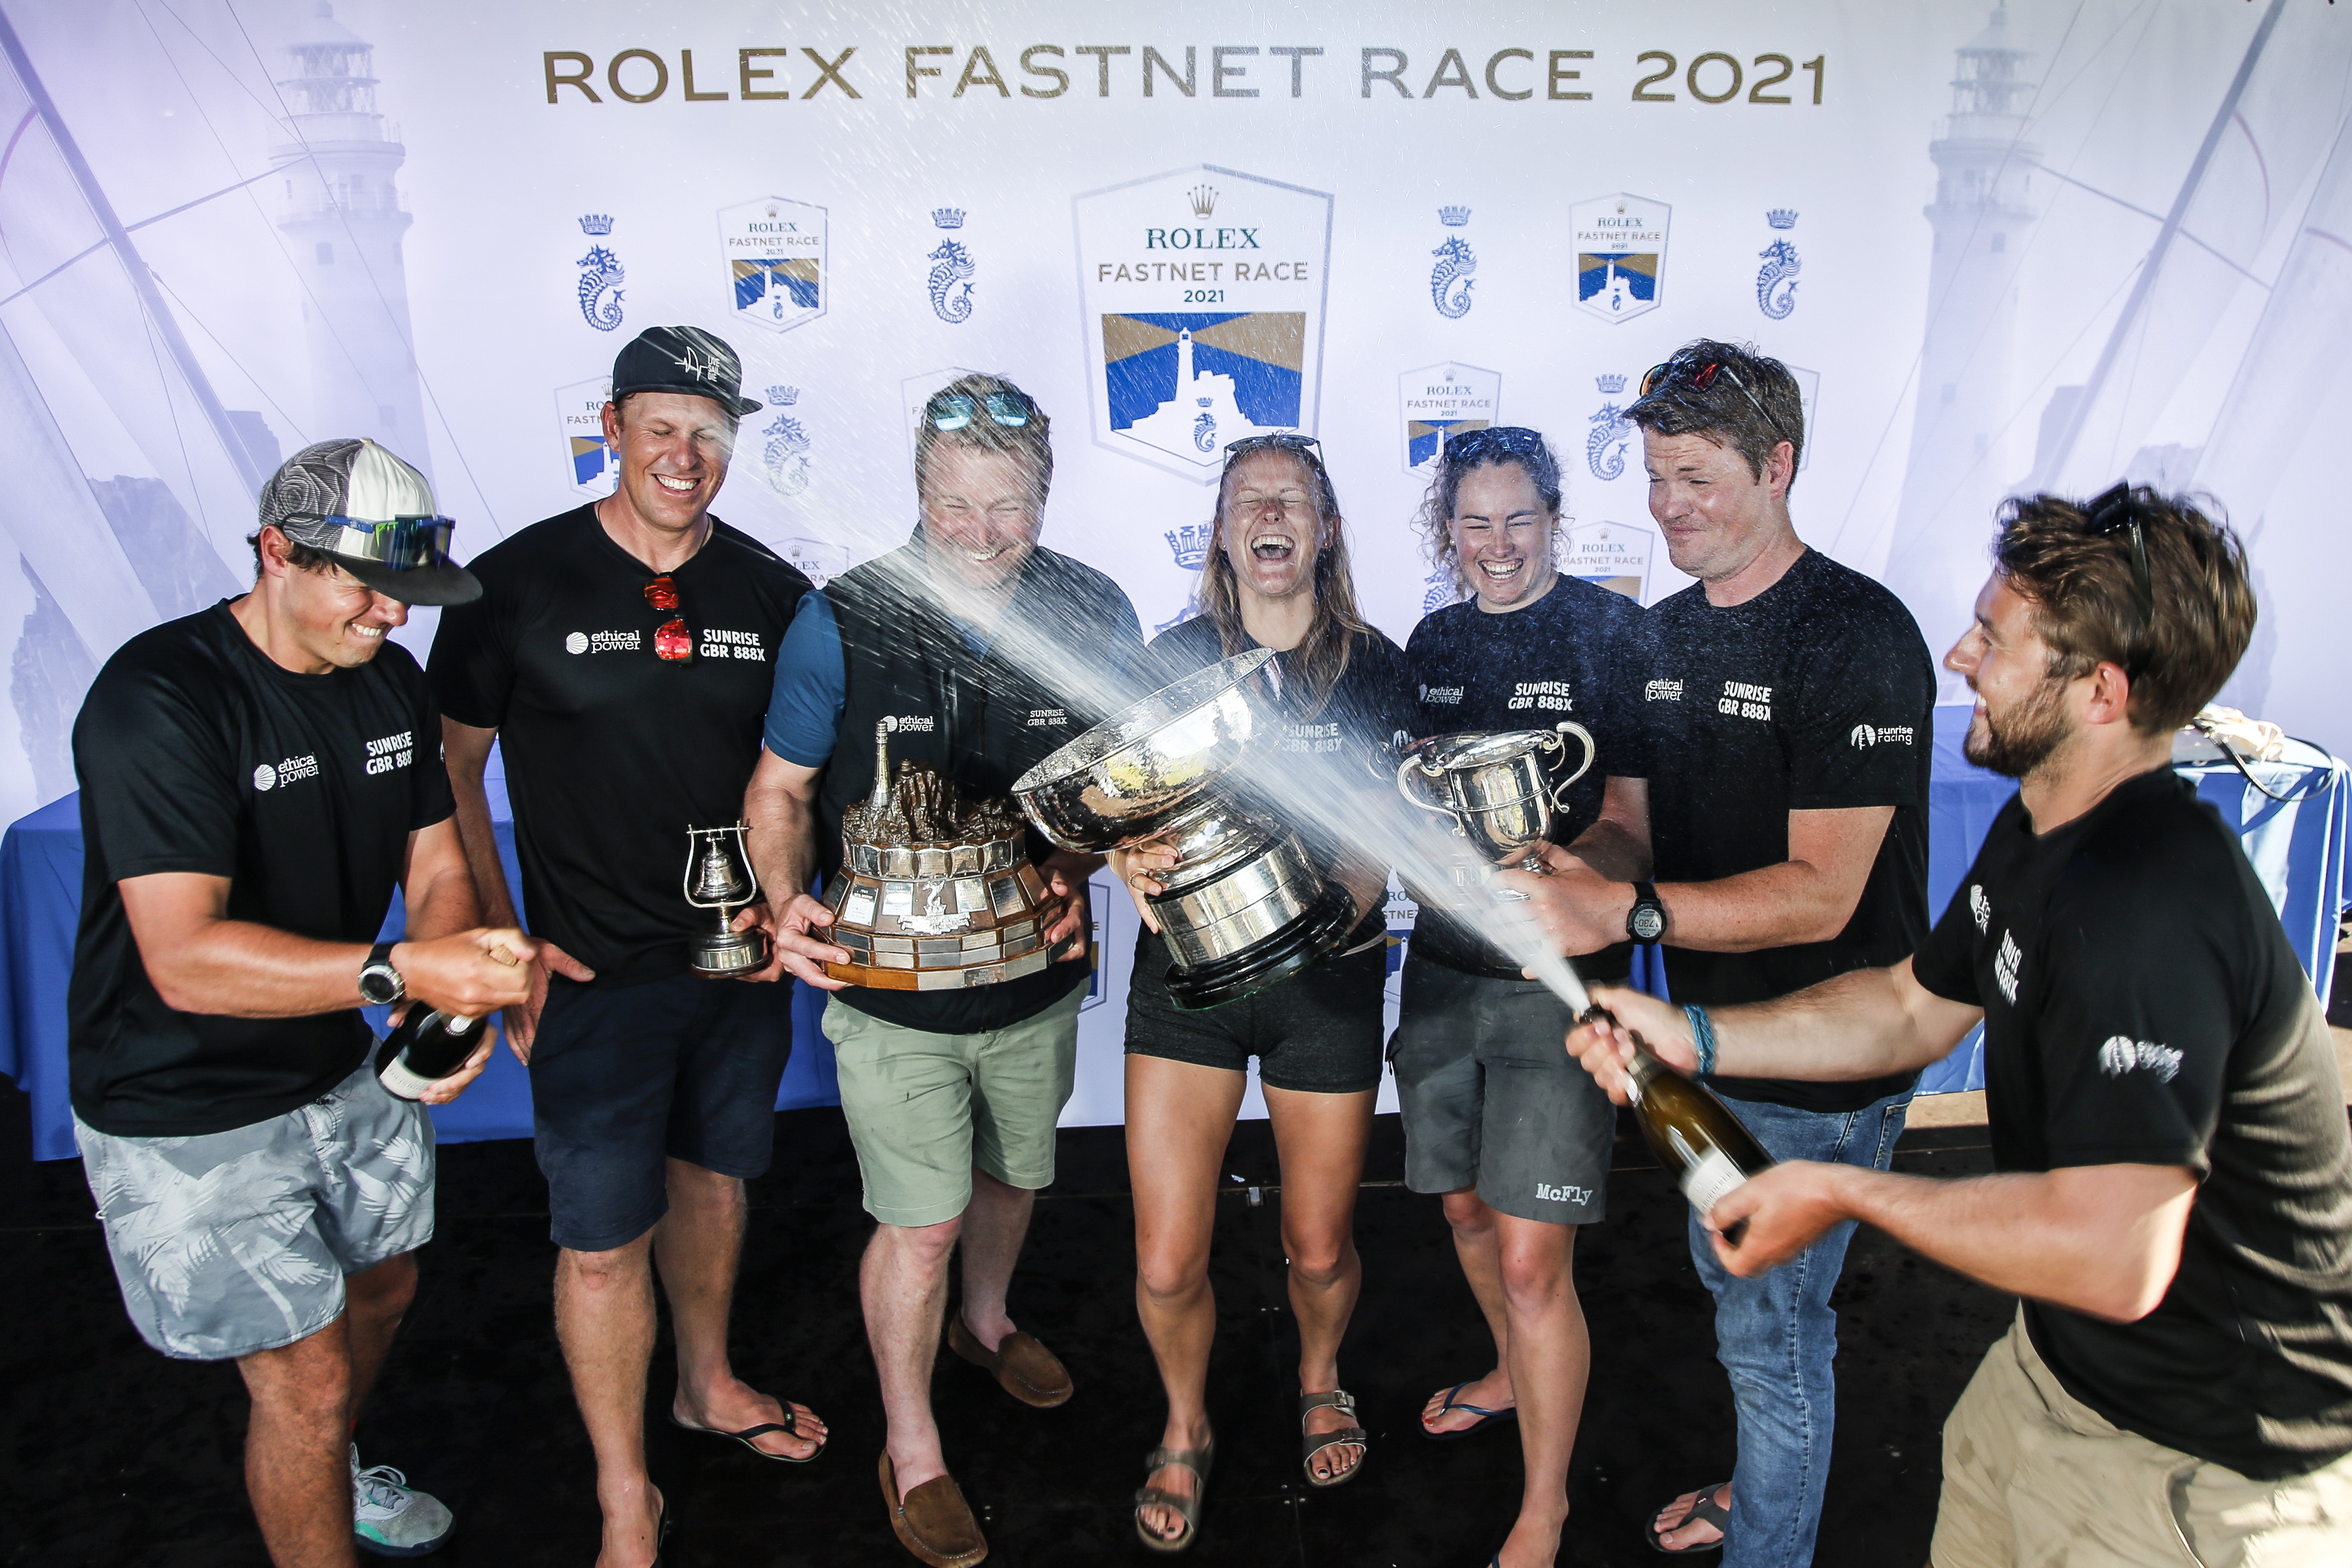 Kneen and his crew celebrate the Rolex Fastnet Race triumph. Photo: RORC/Paul Wyeth